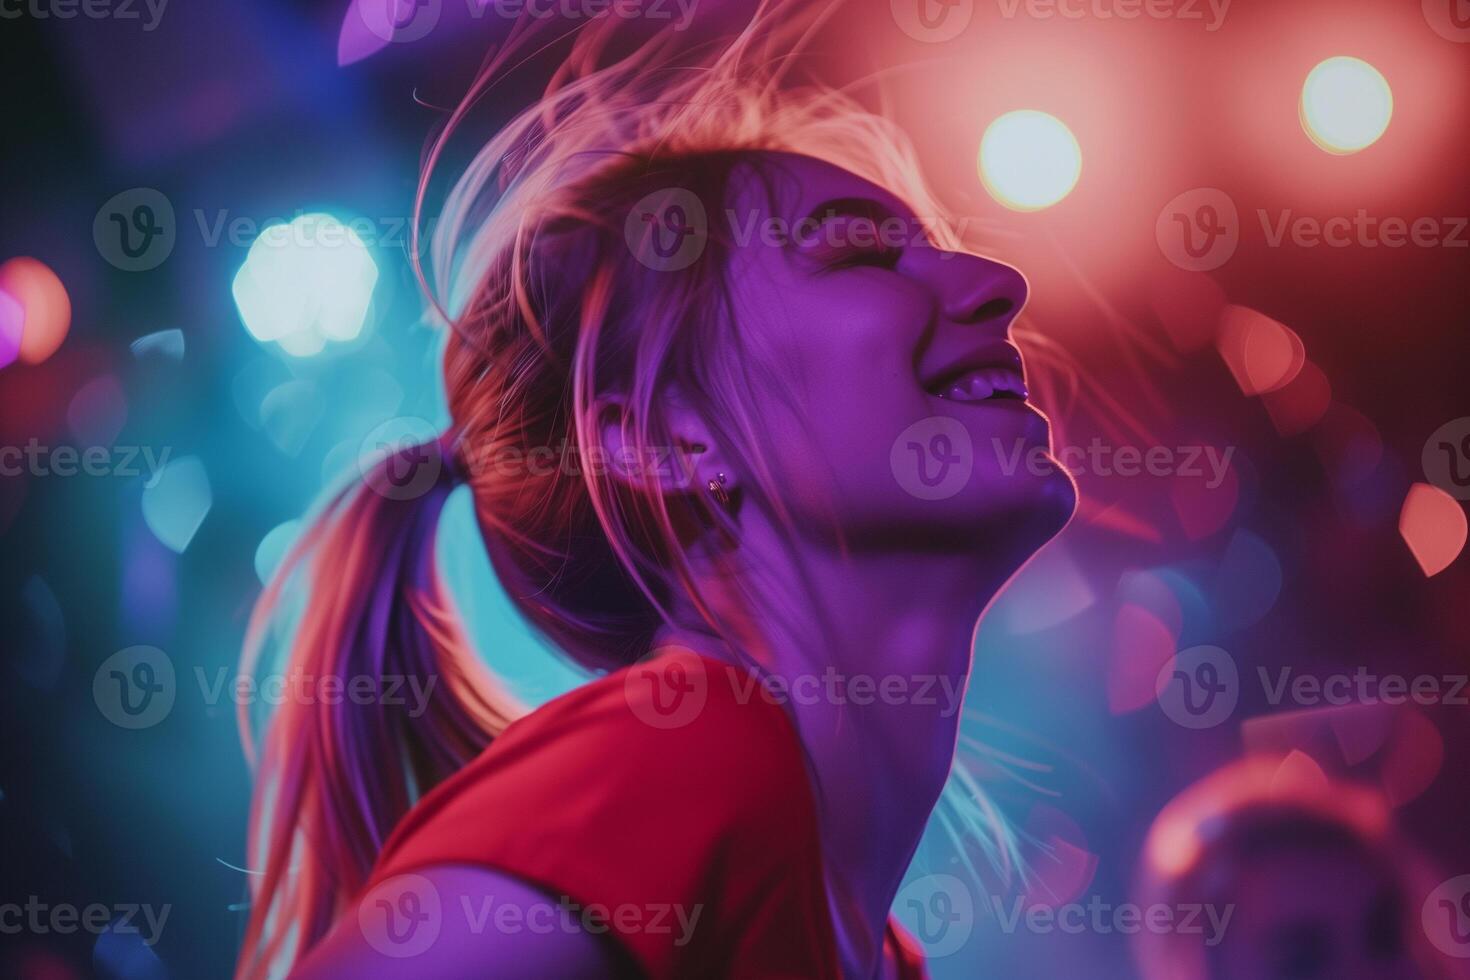 AI generated a girle with blonde hair in a ponytail joyfully dancing at a nightclub photo